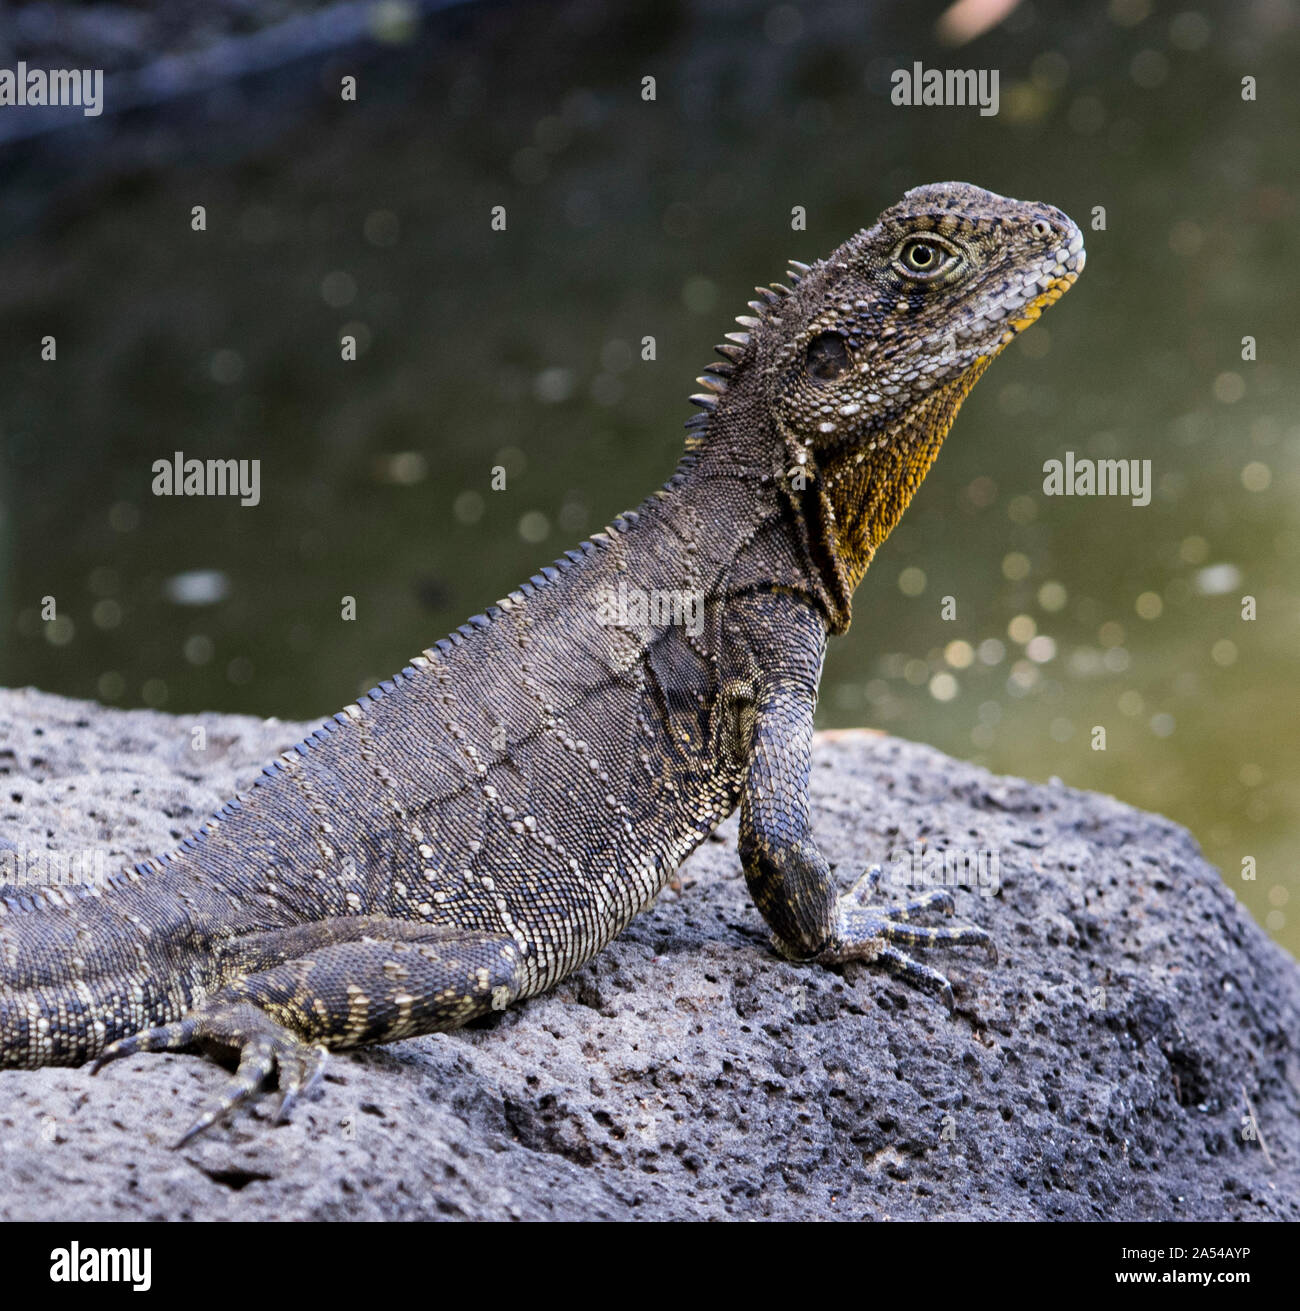 Australian Eastern Water Dragon lizard, Itellagama lesueurii, in the wild and with alert expression on rock beside water in city park. Stock Photo